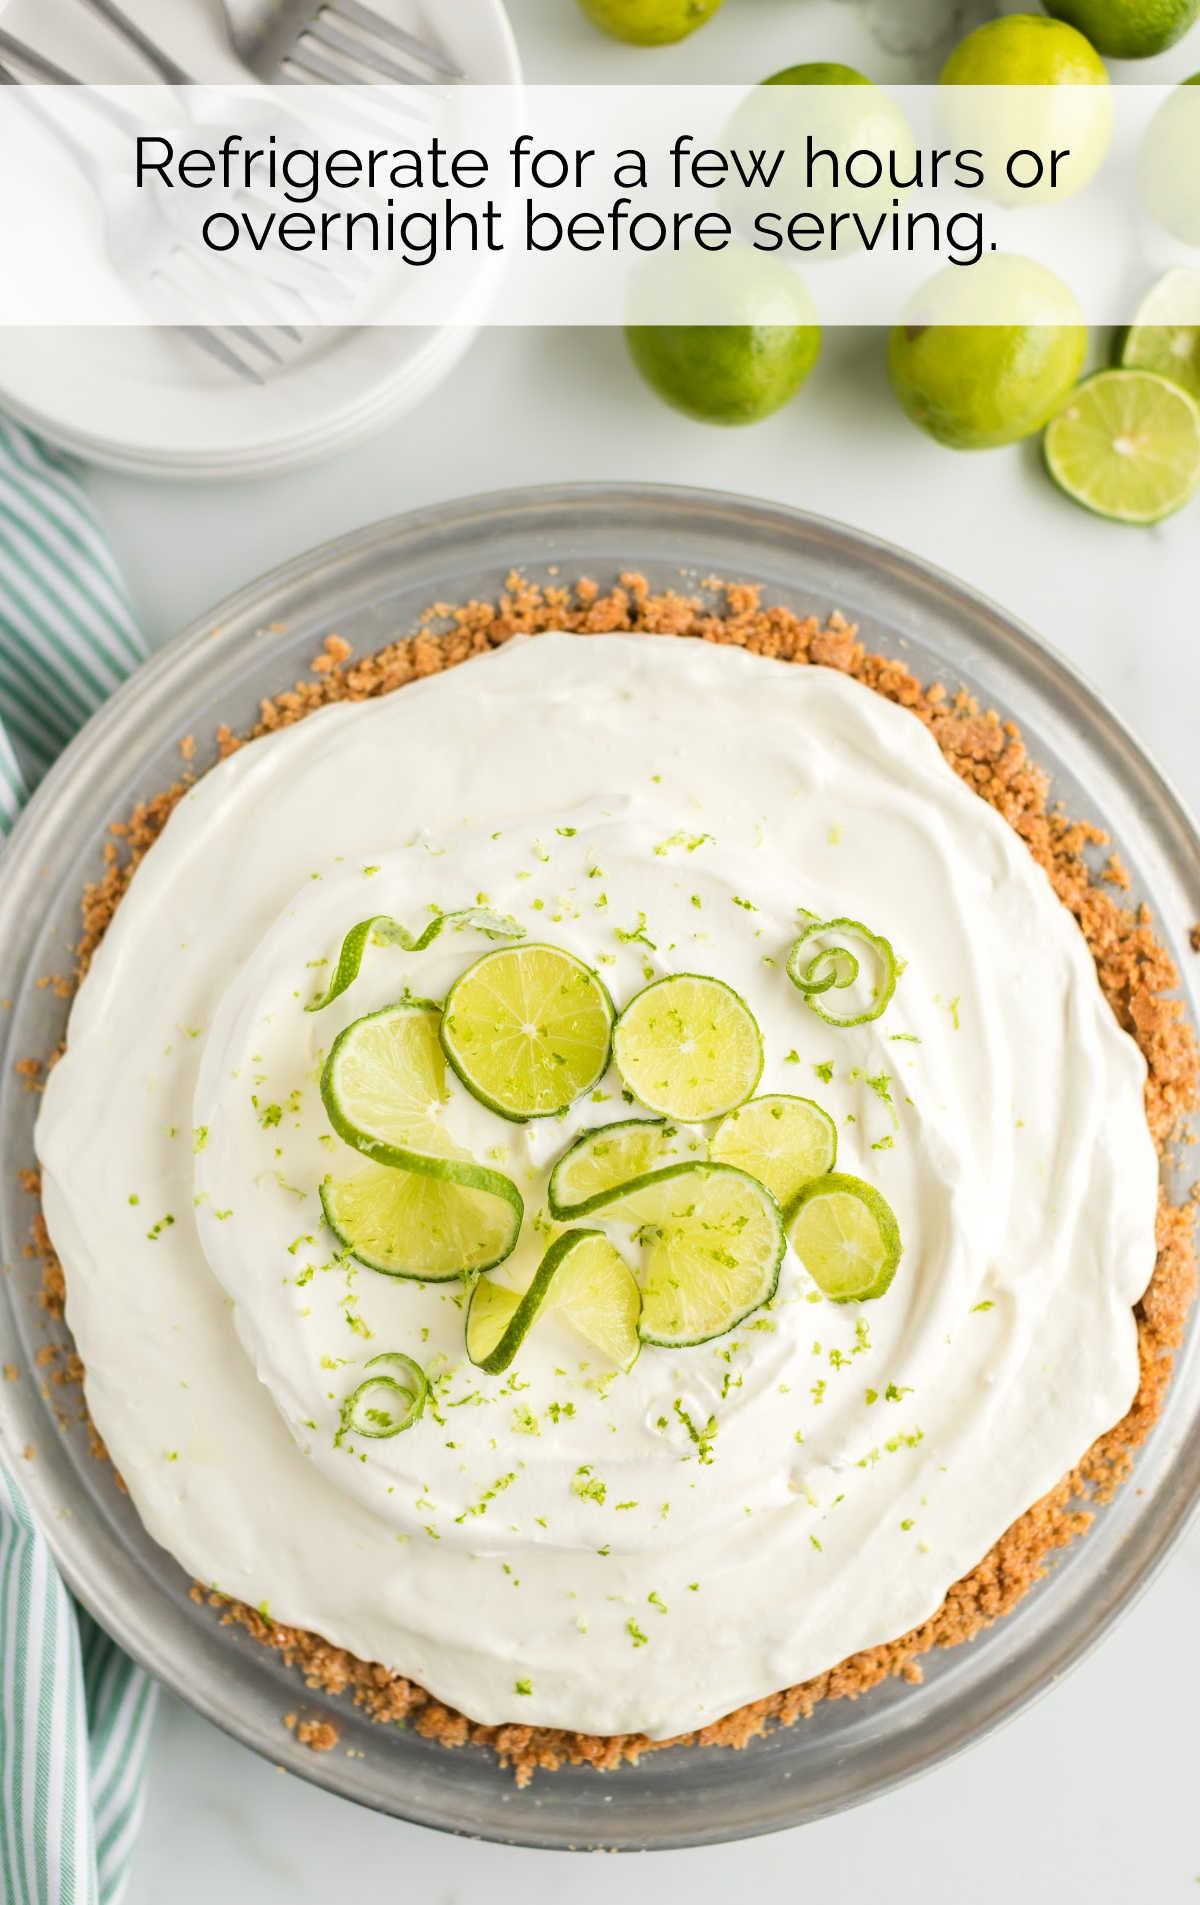 key lime pie garnished with lime slices